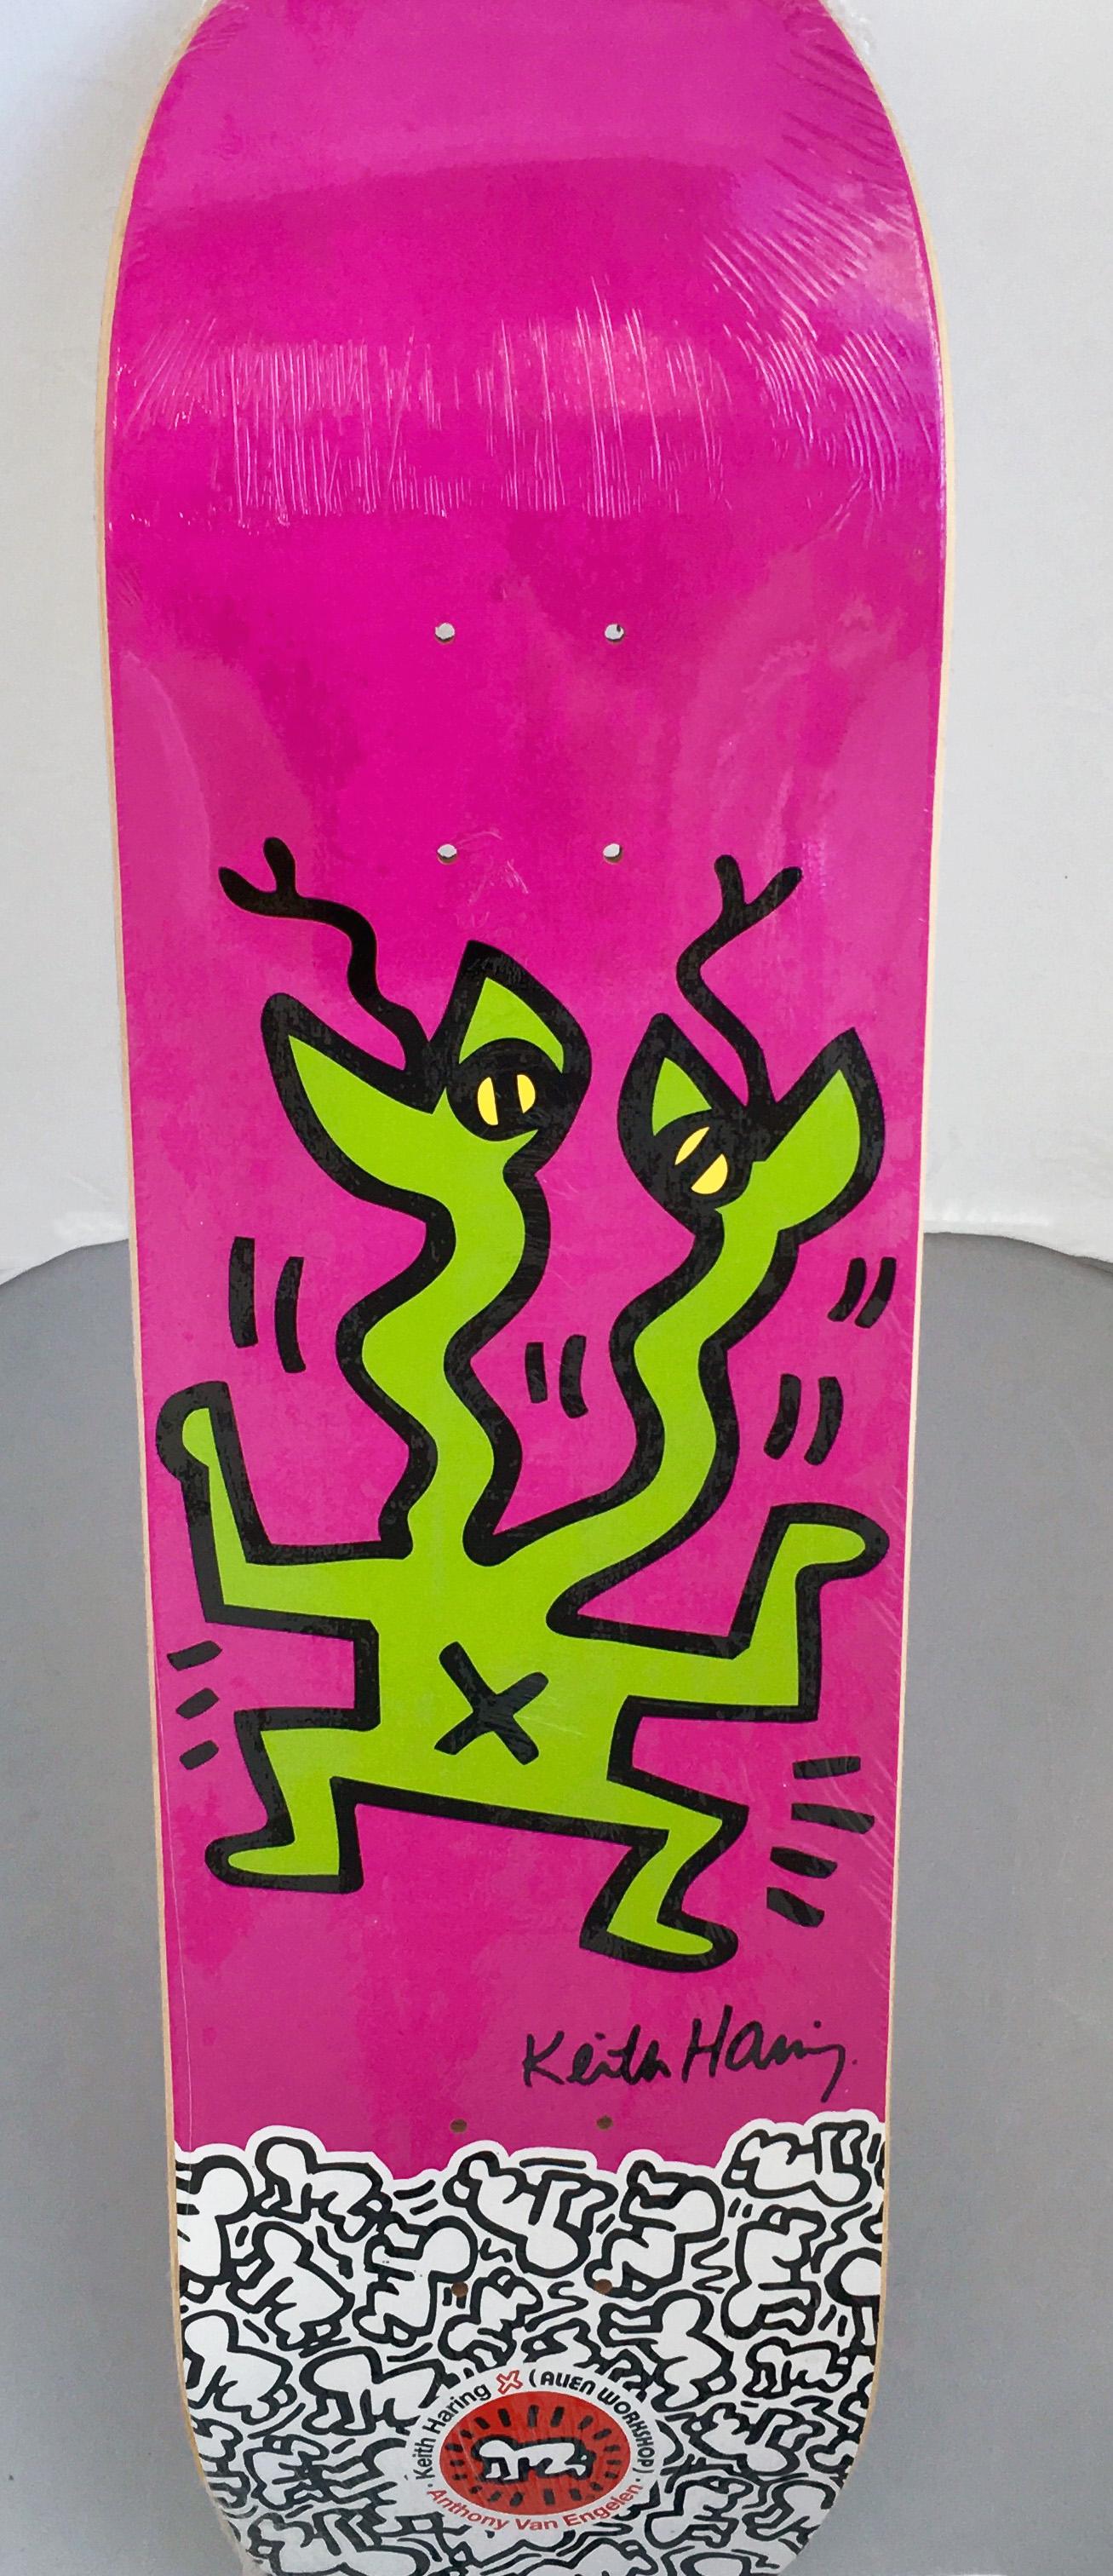 Keith Haring Skateboard Deck (Purple) - Print by (after) Keith Haring